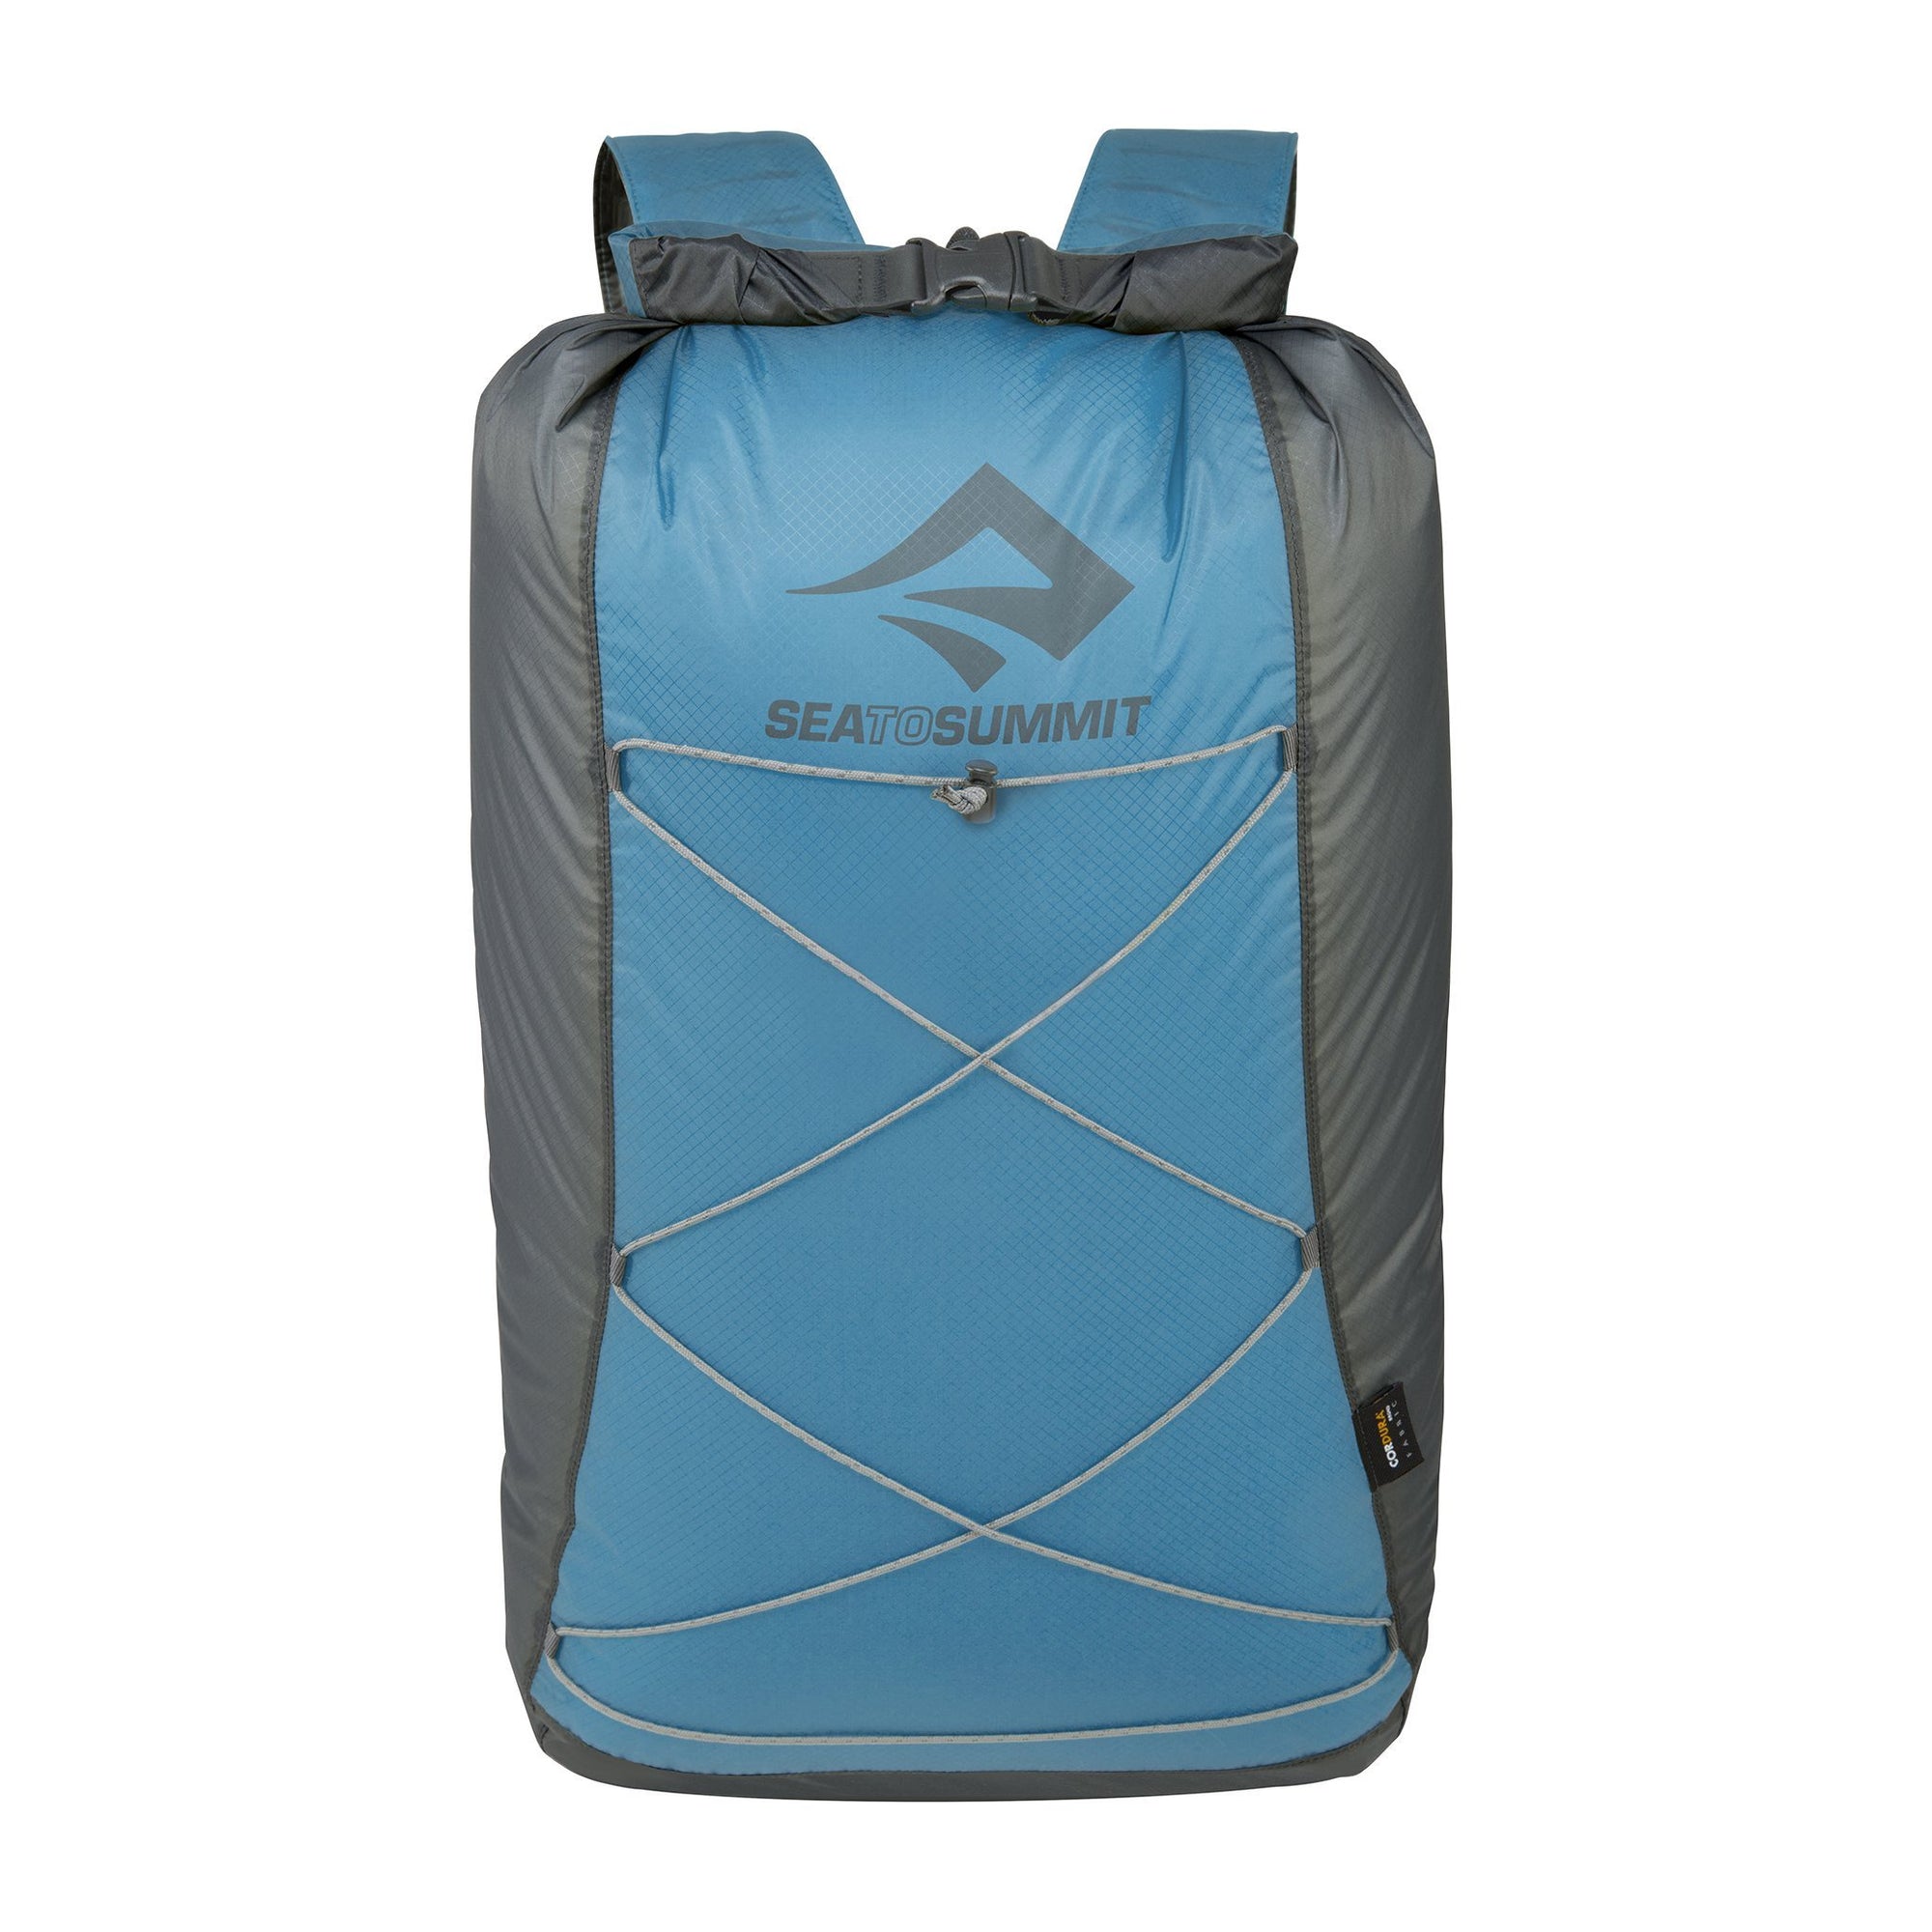 Sea to Summit Ultra Sil Dry™ DayPack 22L